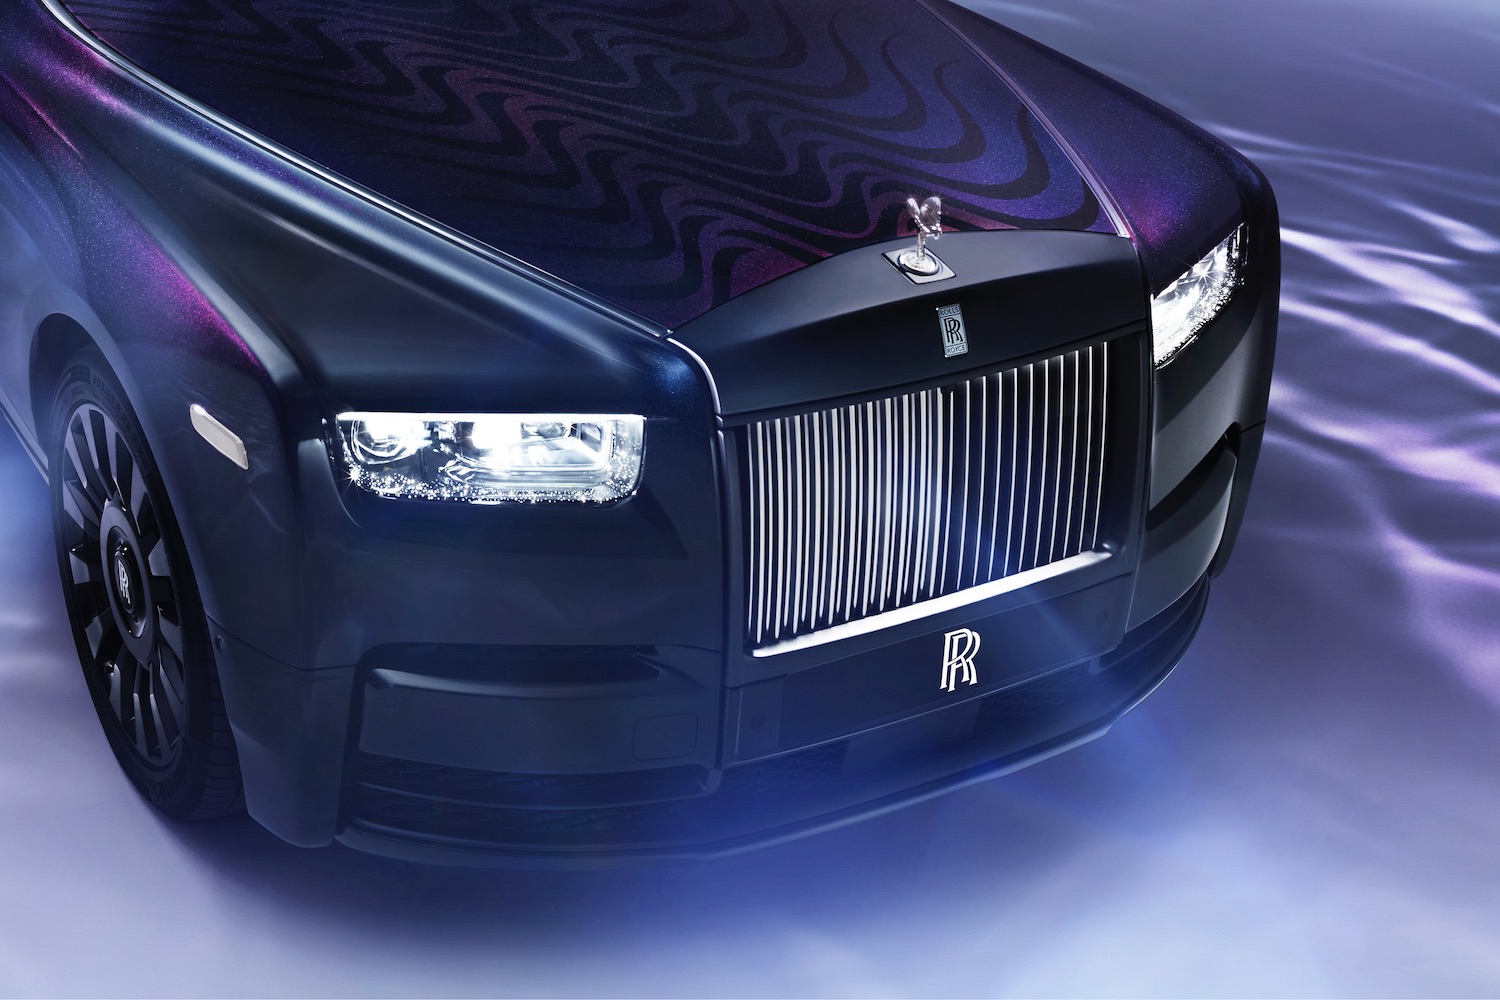 Close up of front end of the Rolls-Royce Phantom Syntopia from overhead with lights on and smoke in front of the car.